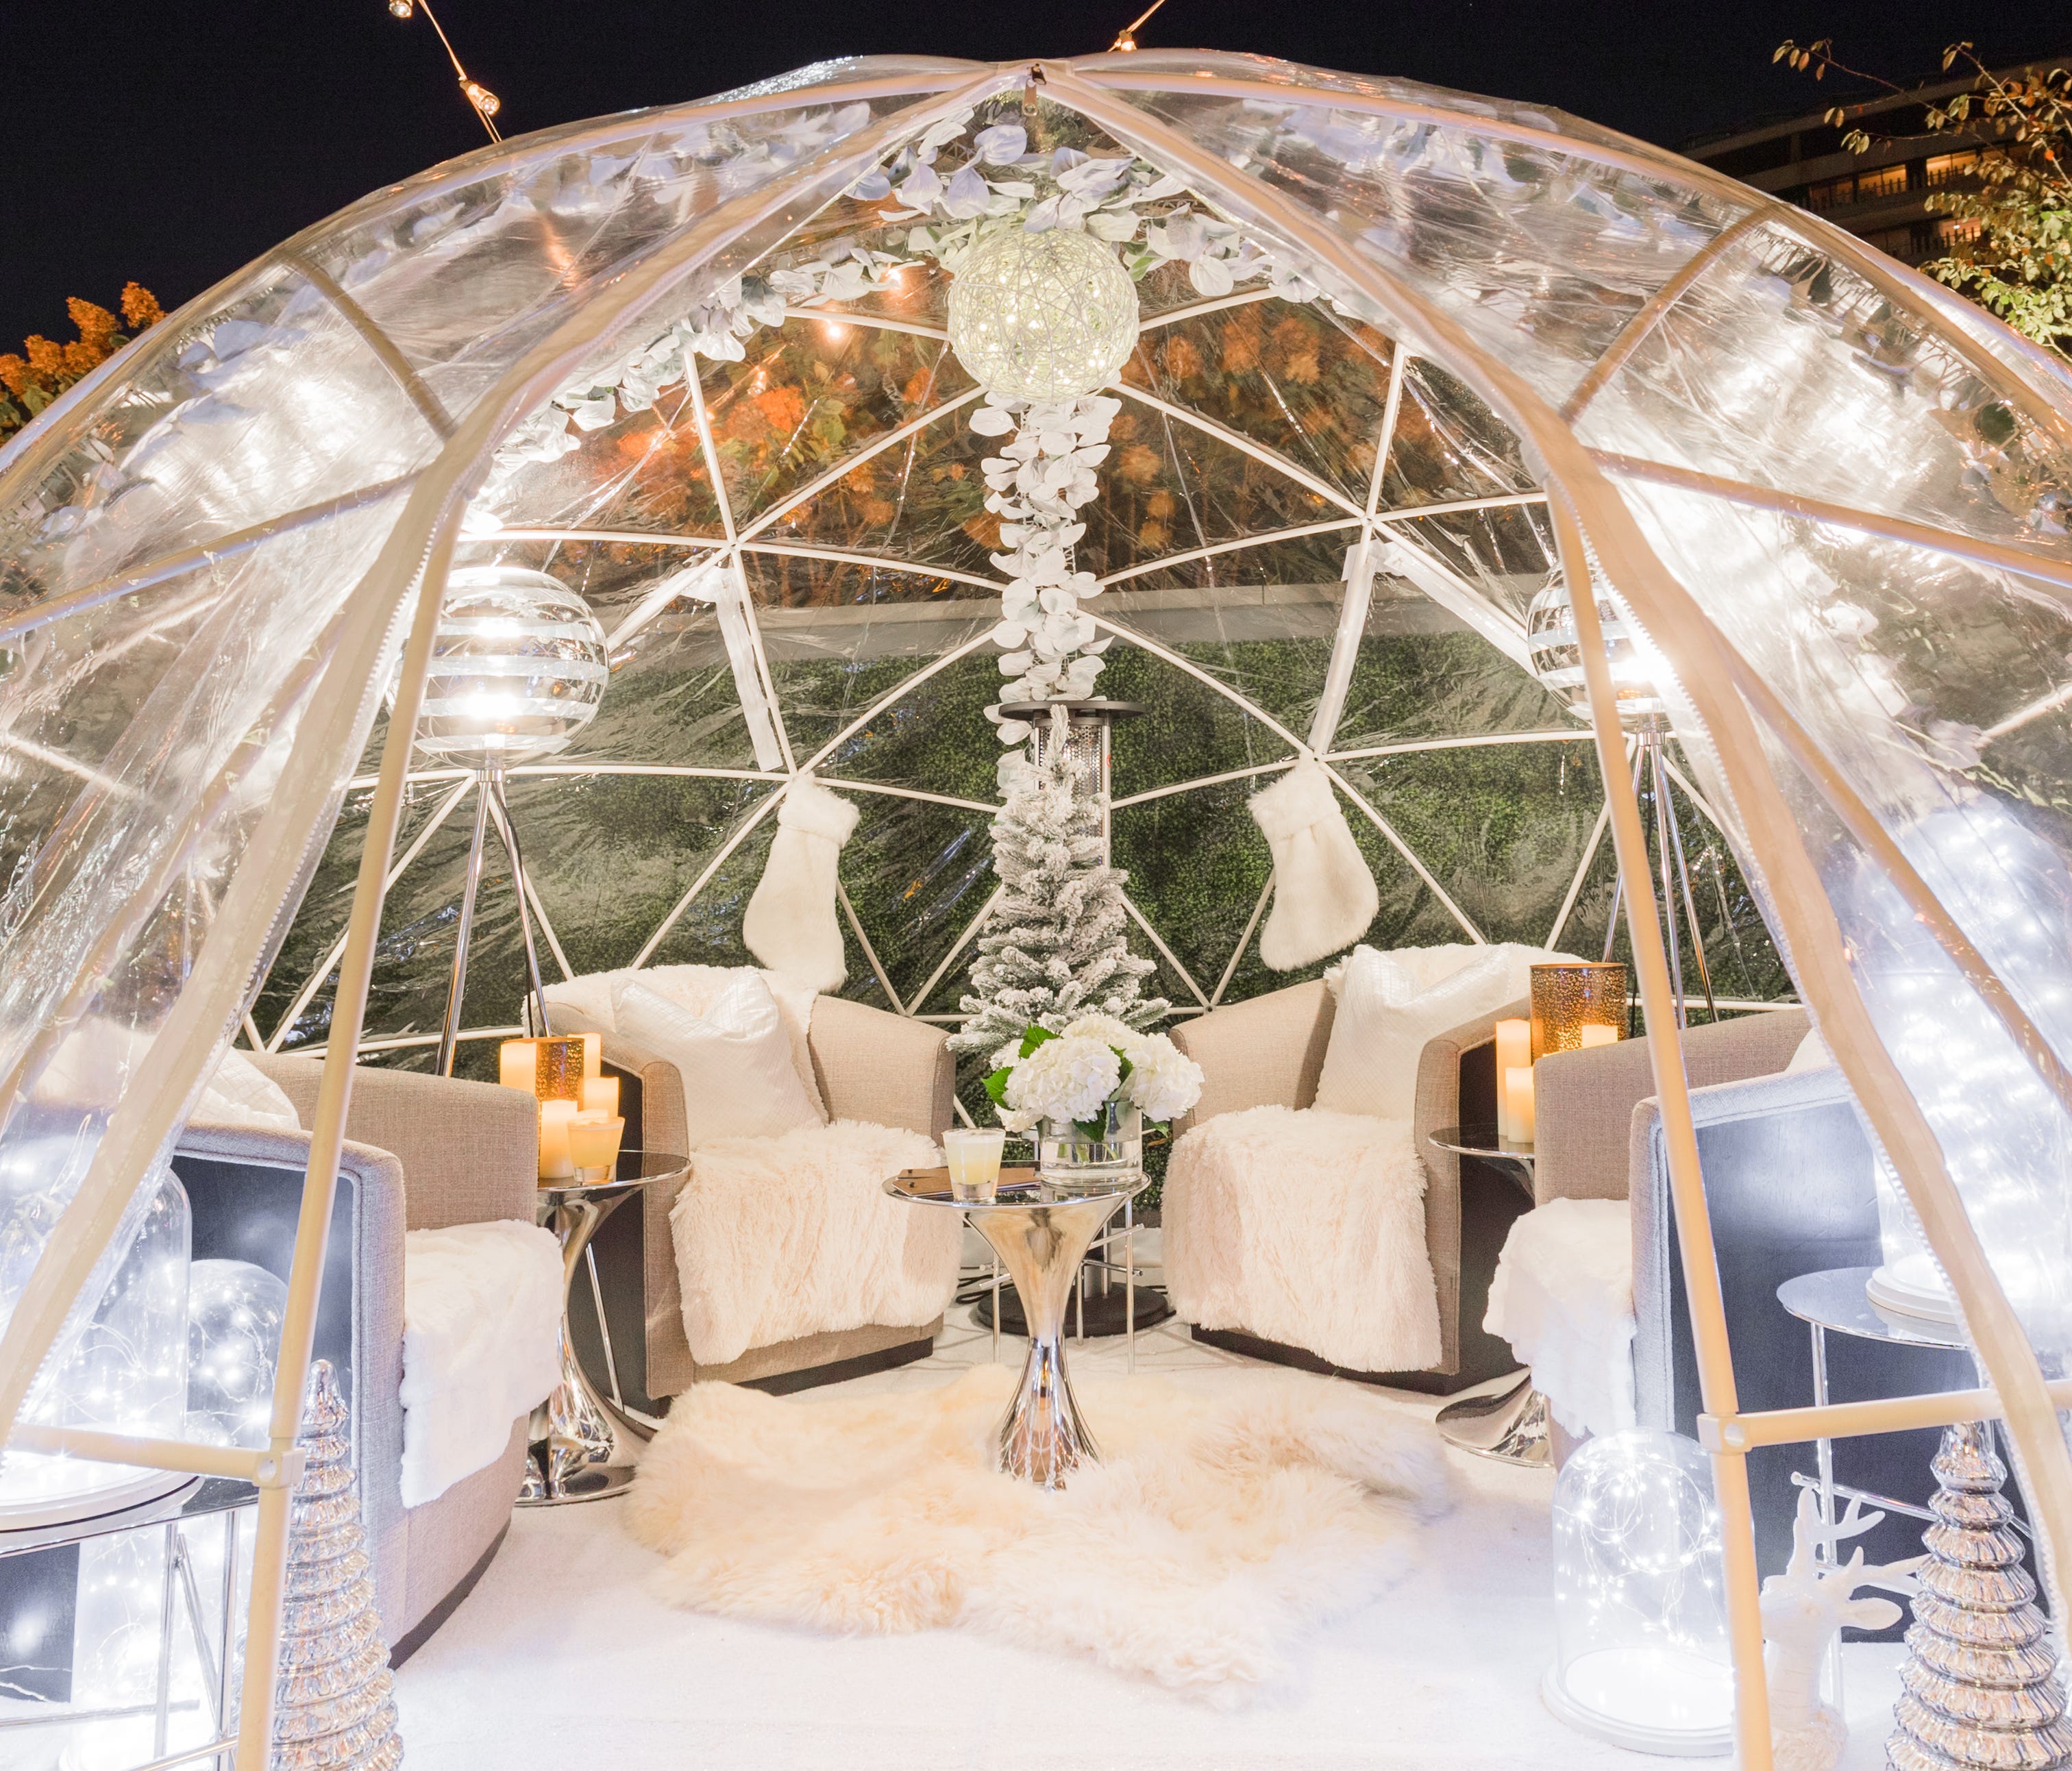 The Watergate Hotel has igloos outside its Next Whisky Bar.